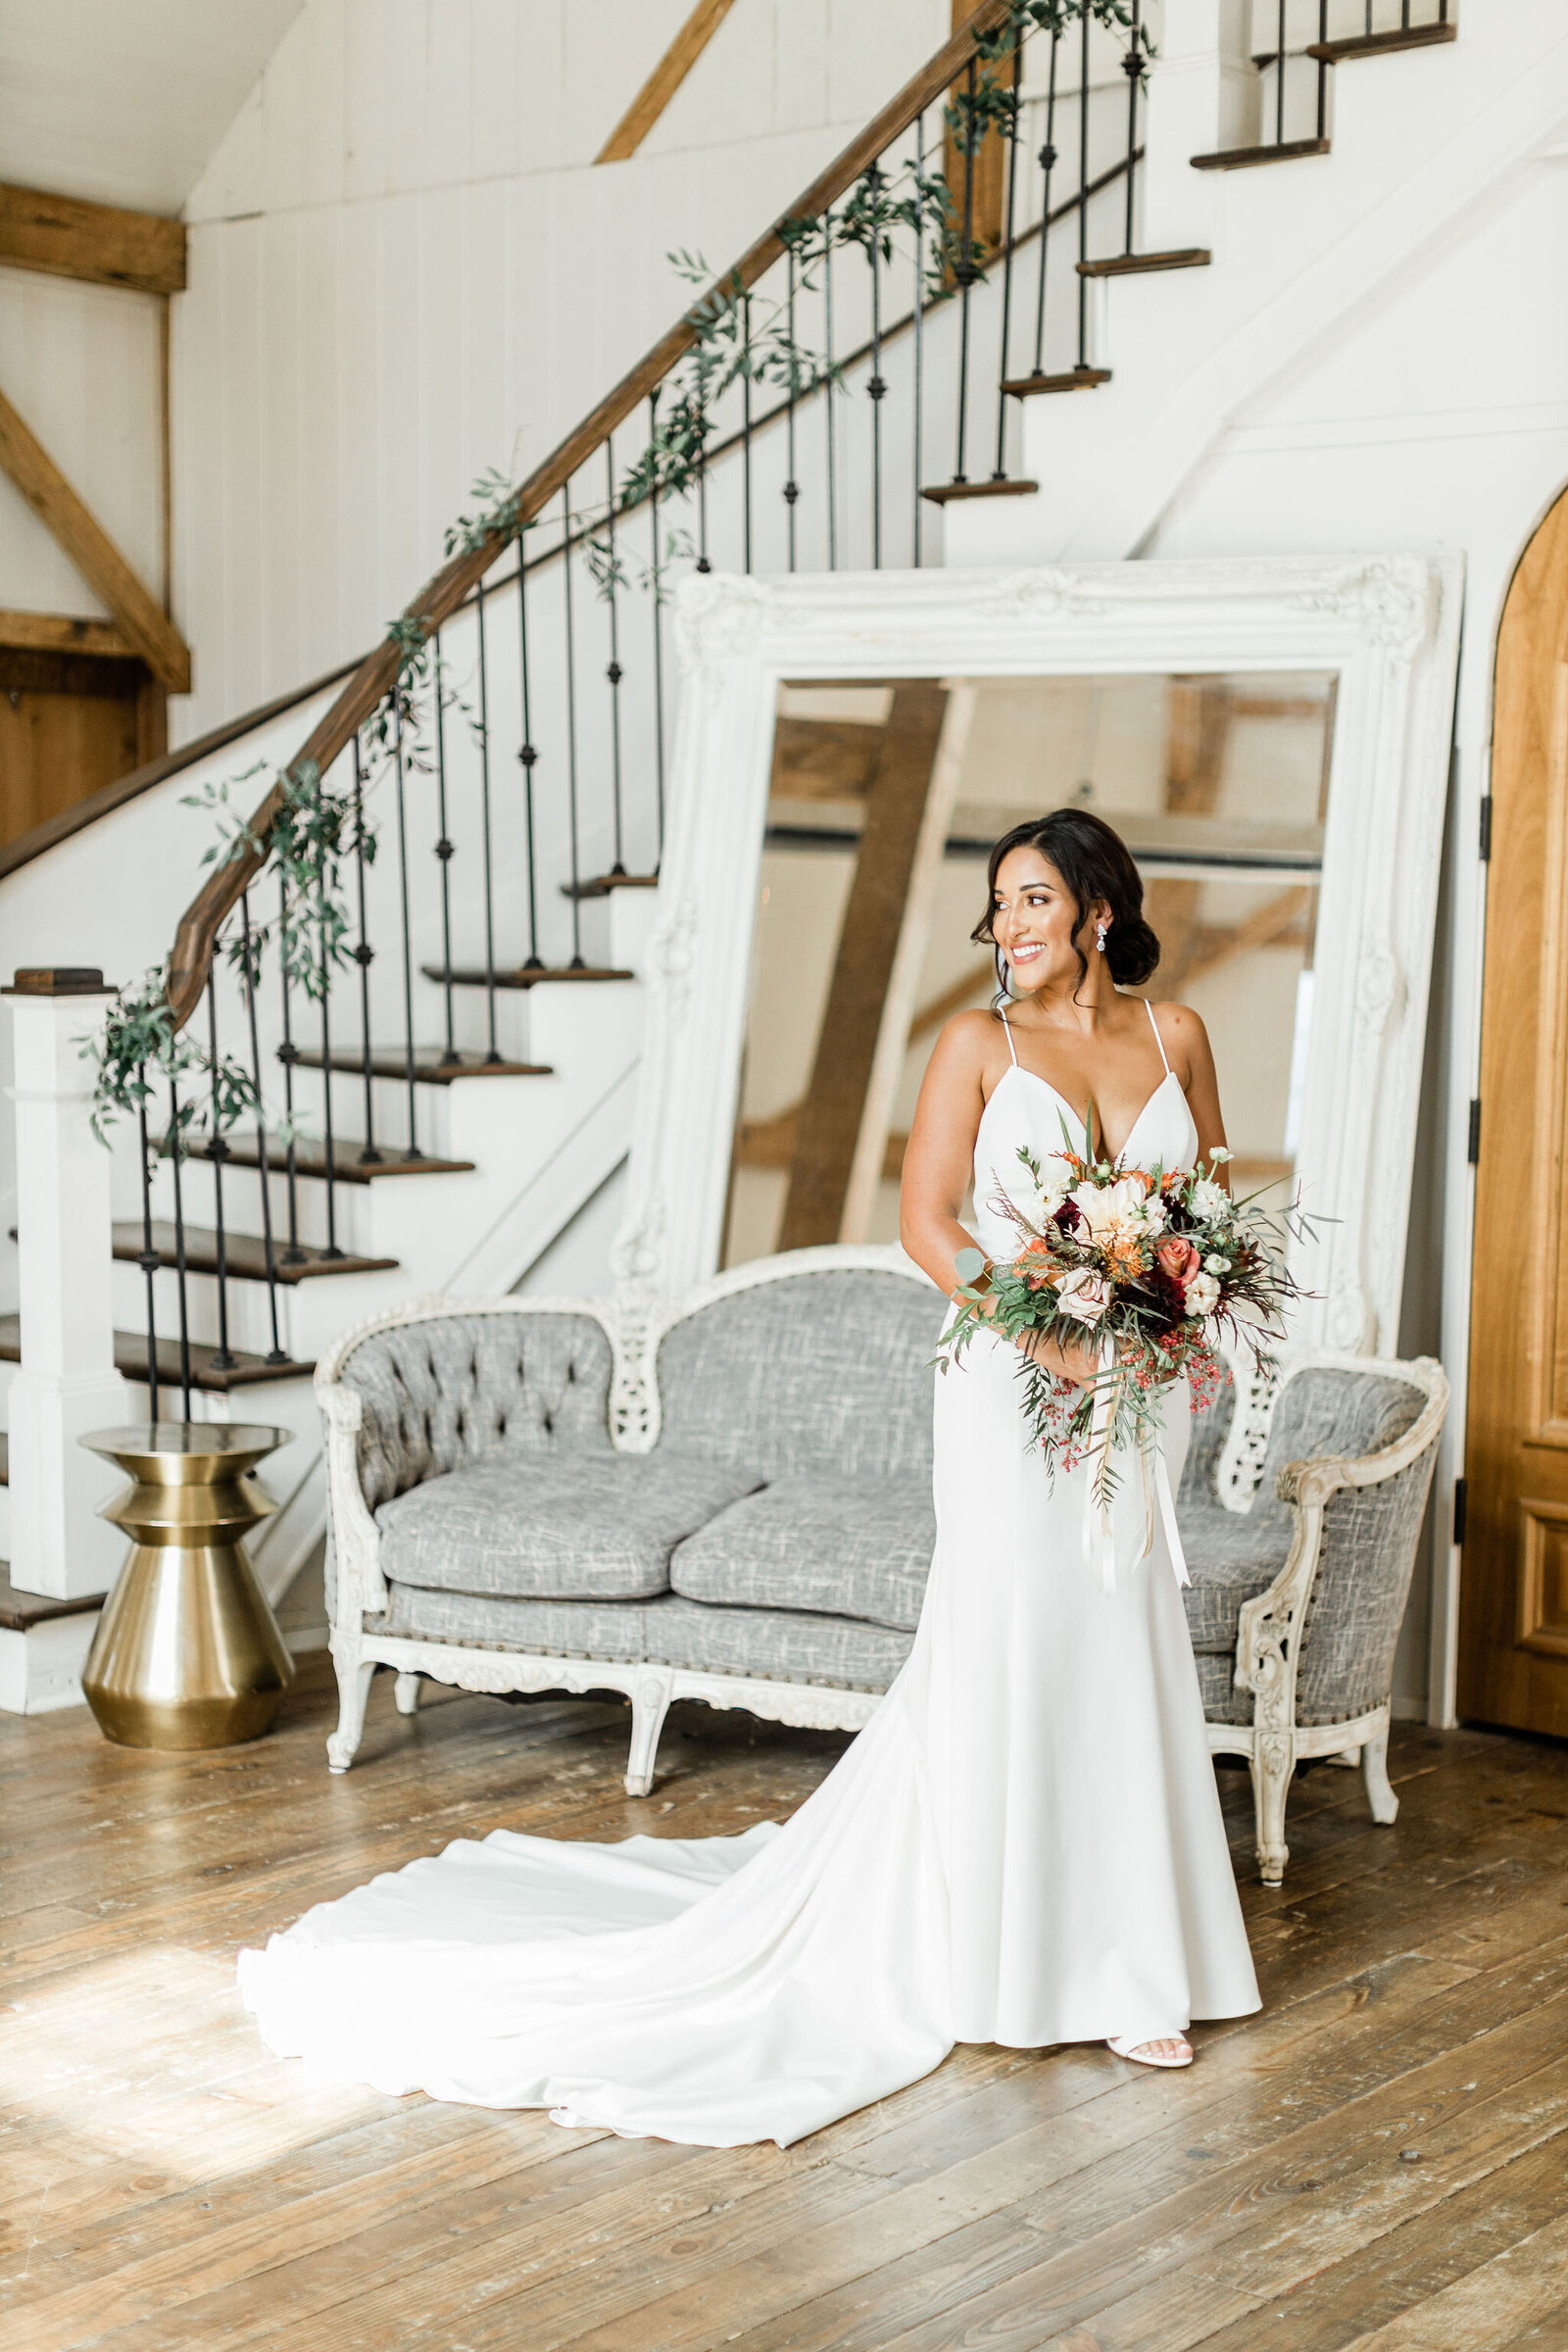 Beautiful bridal Portraits | Cleveland OH | The Axtells Photo and Film